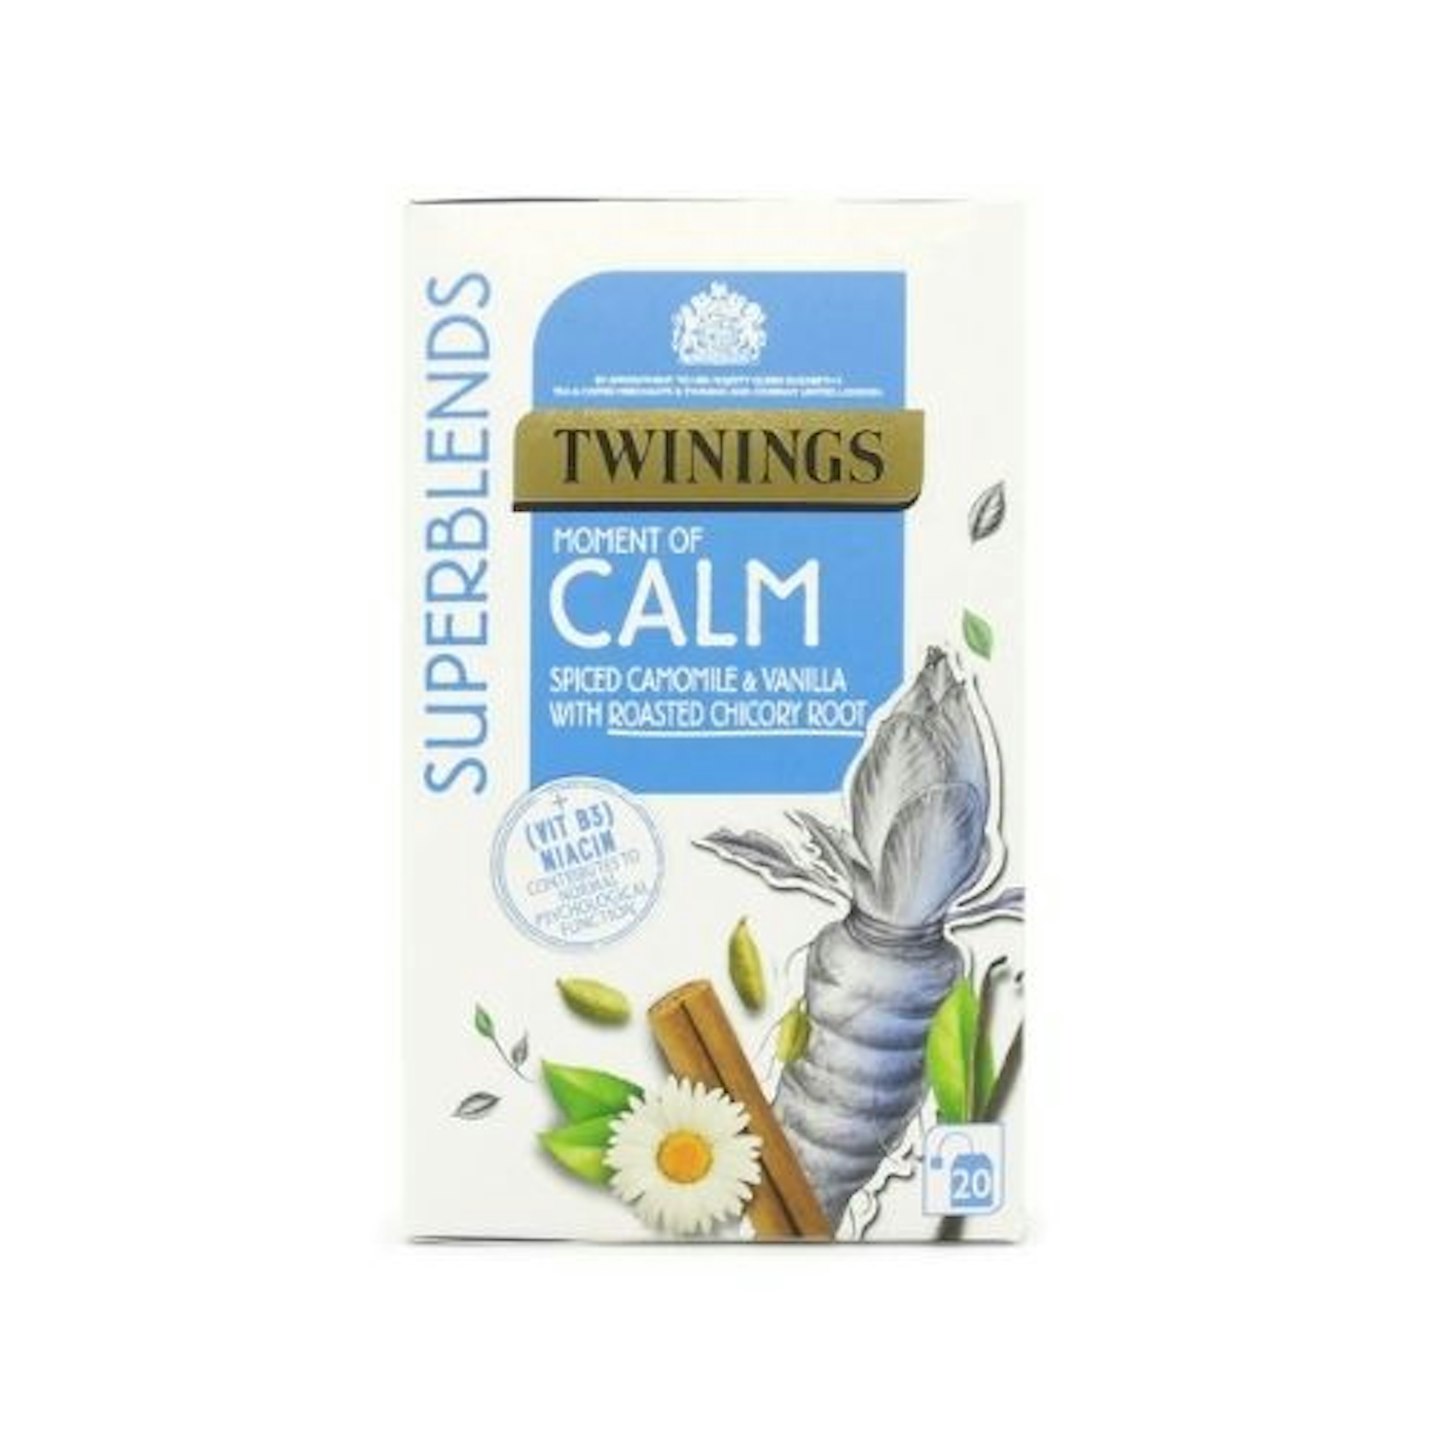 Twinings Superblends Moment of Calm